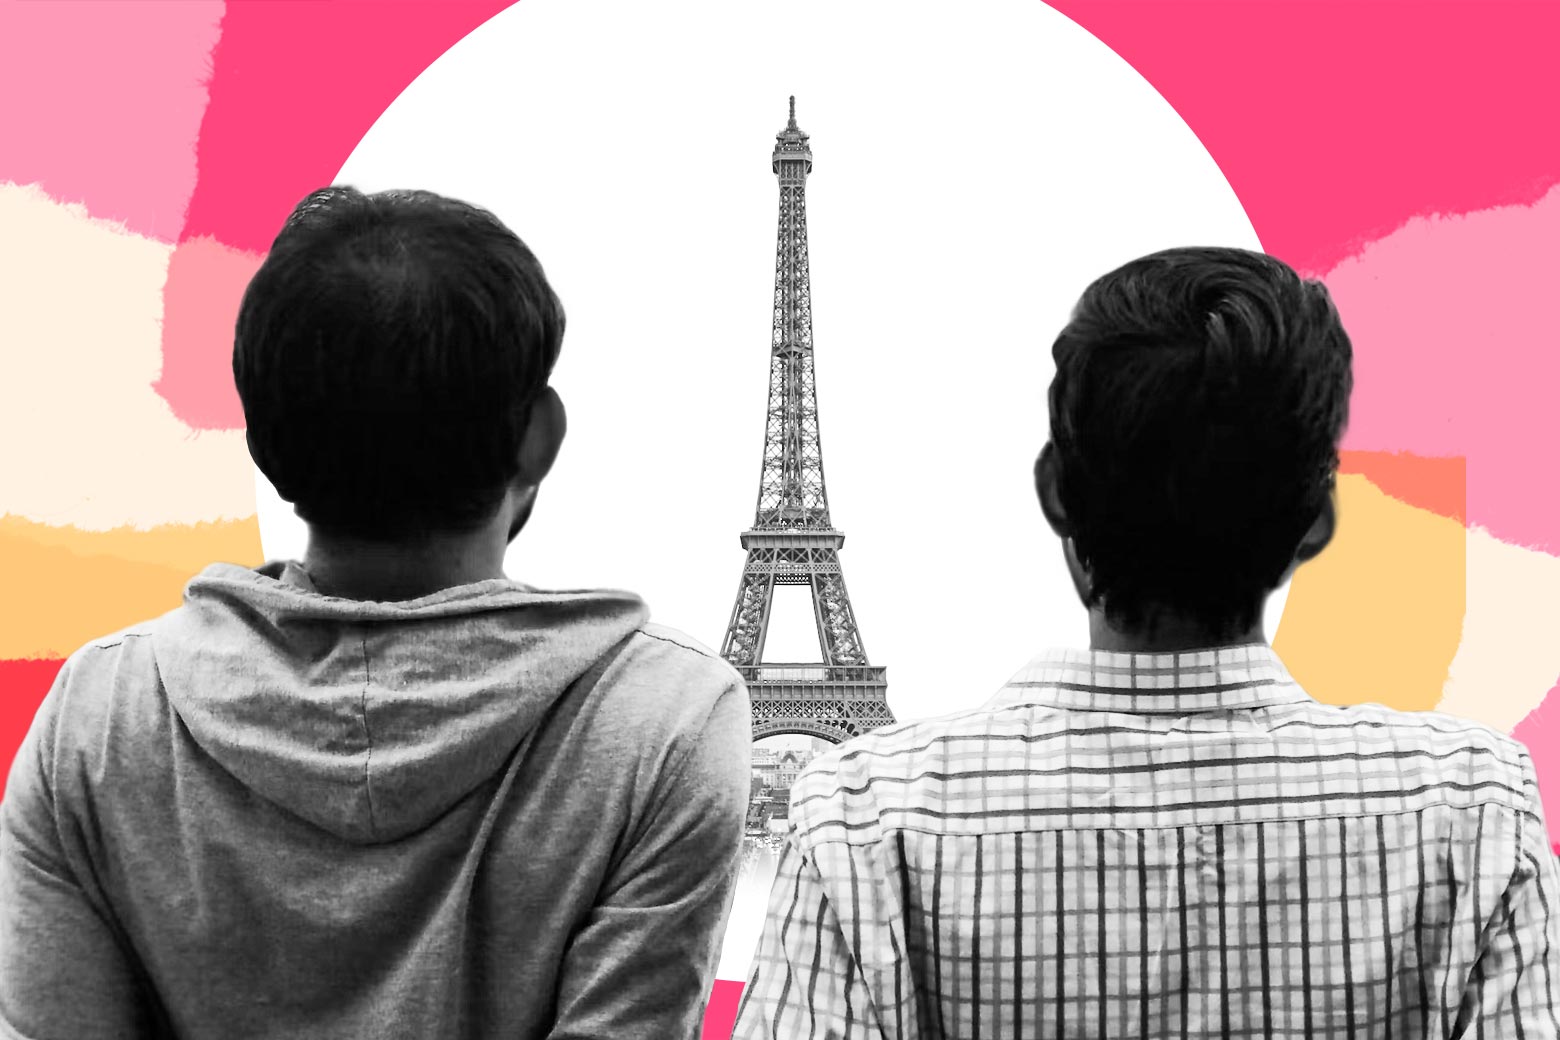 Two brothers in Paris.